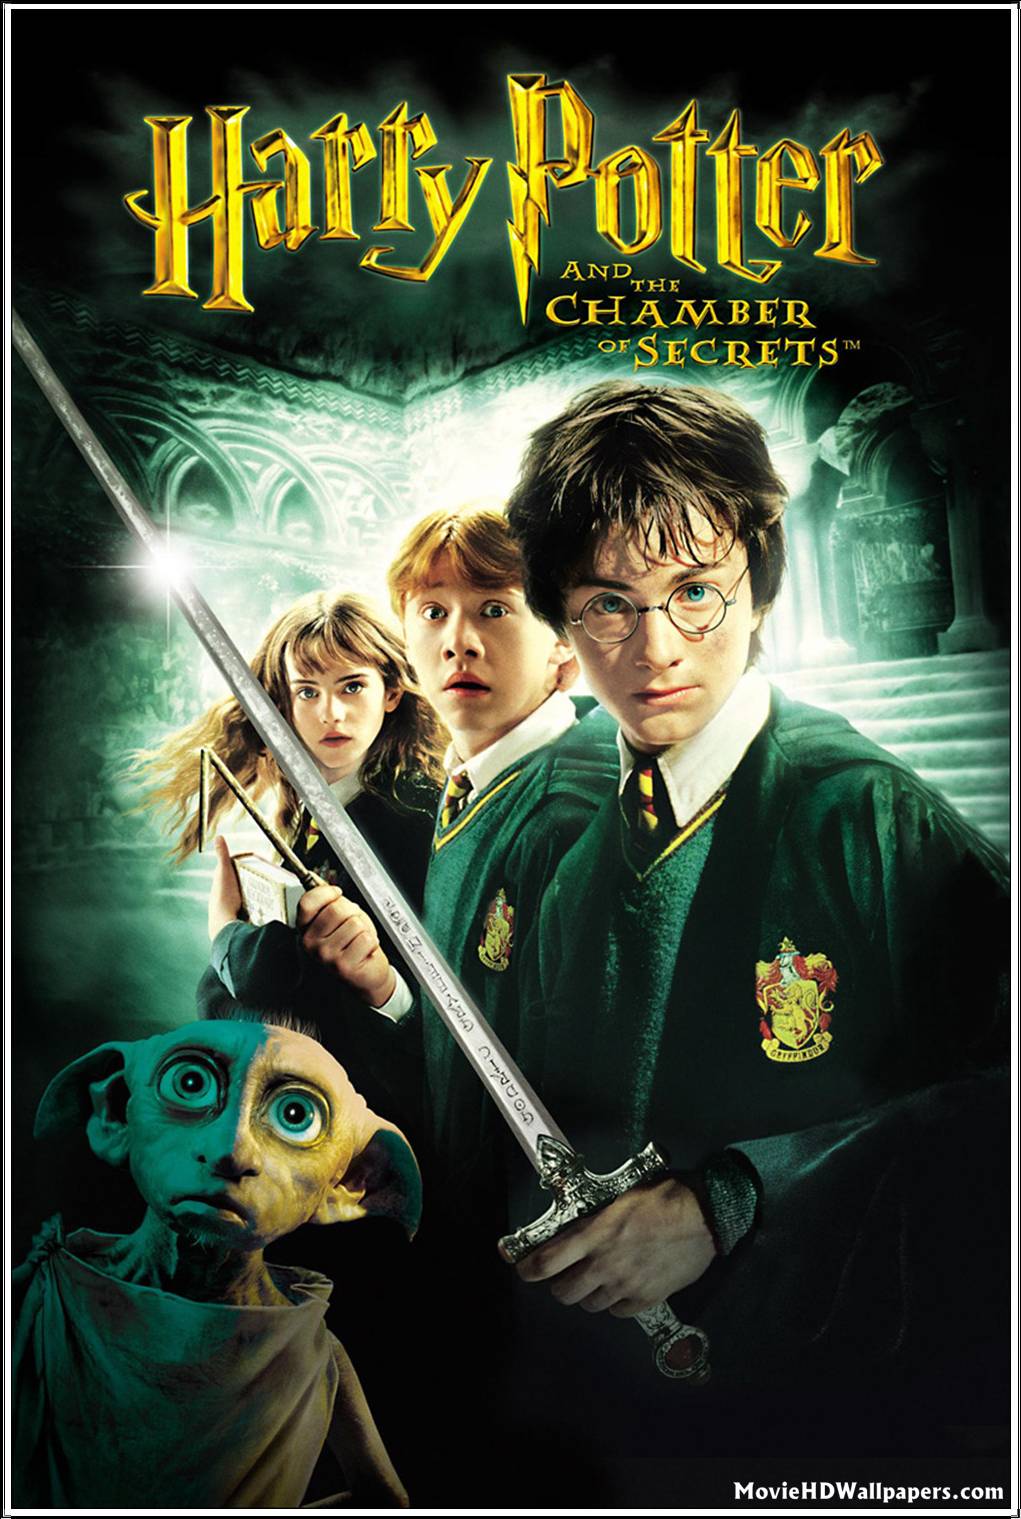 Free download Harry Potter and the Chamber of Secrets 2002 Movie